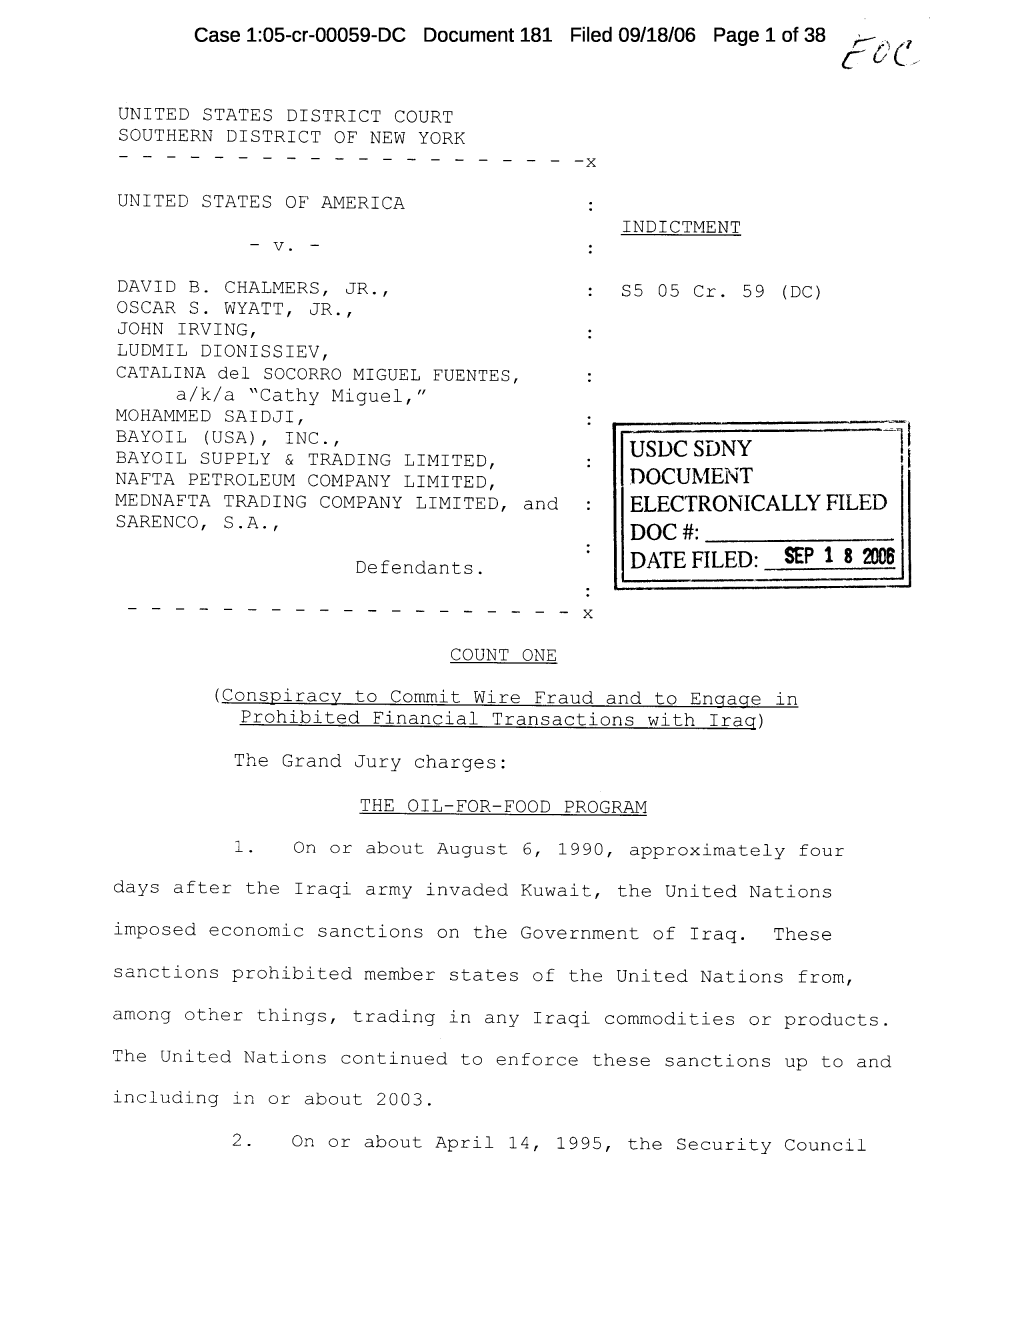 Usuc Sdny Document Electronically Filed Doc